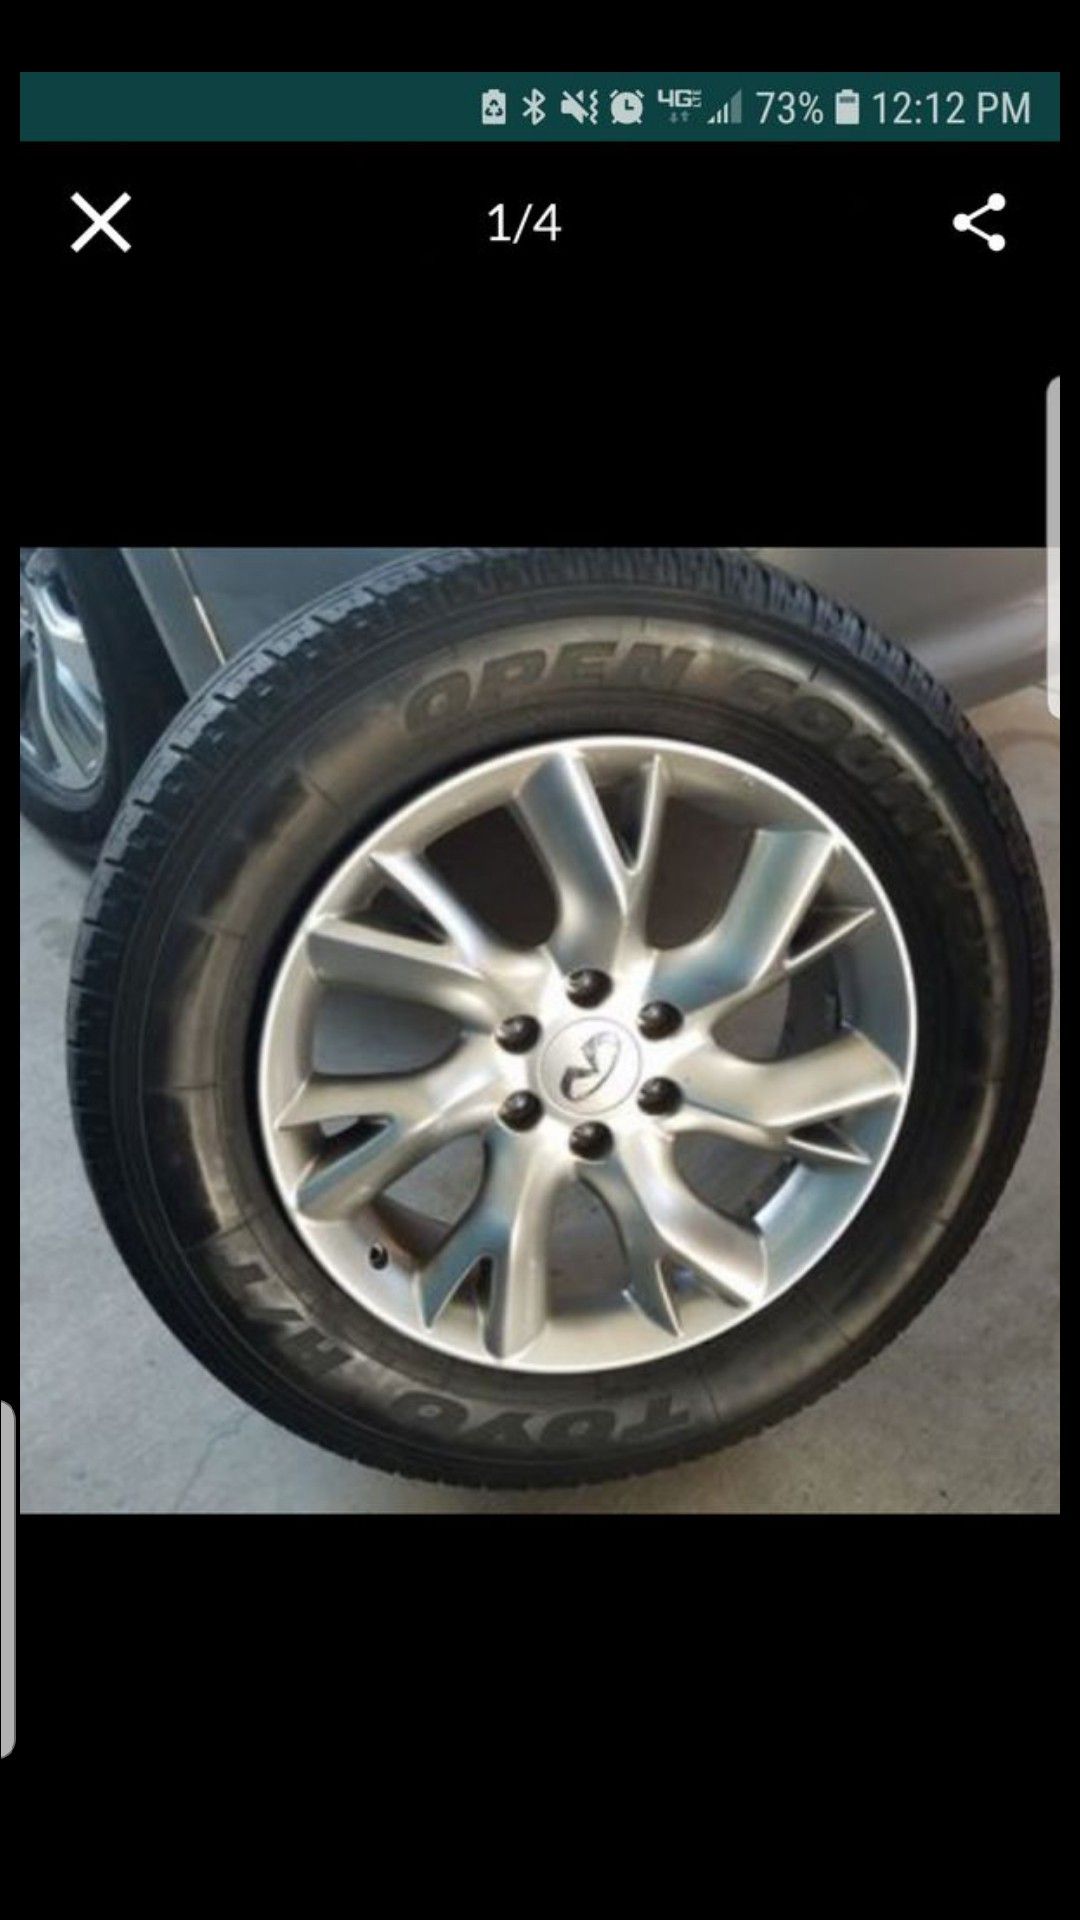 20 inch rims with used tires 150.00 for all 4